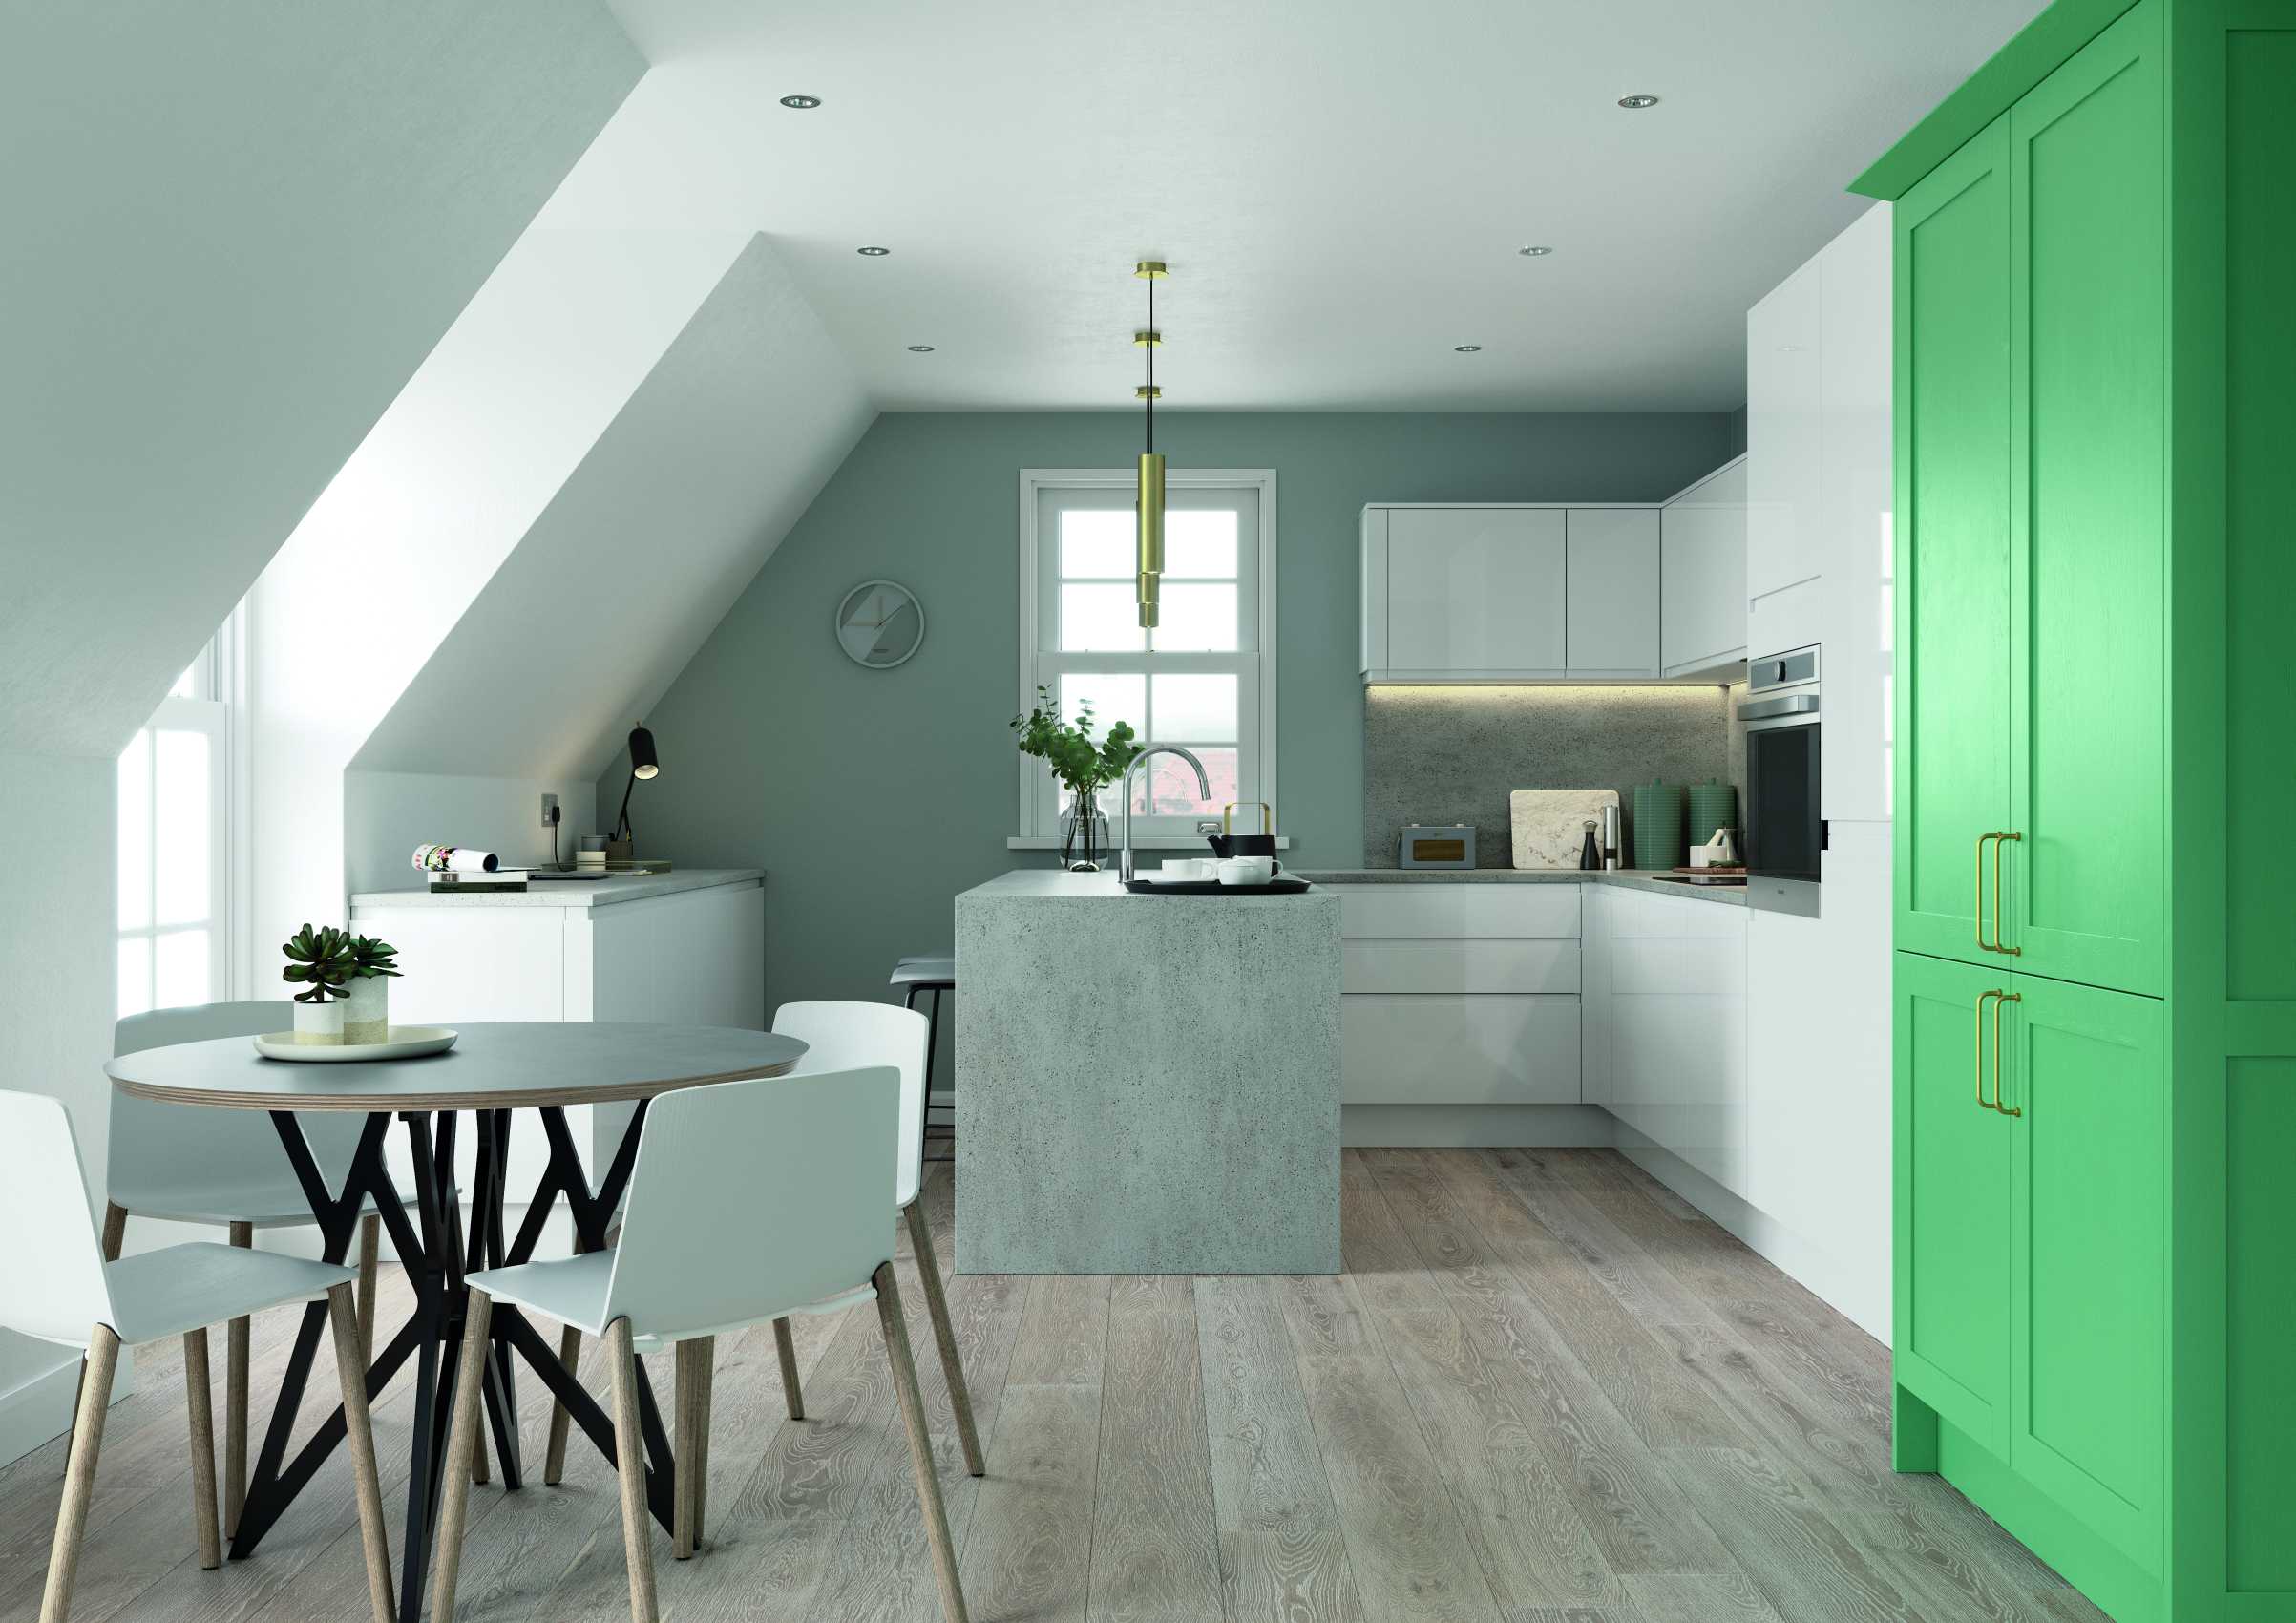 gloss white and green handleless kitchen worktops whole